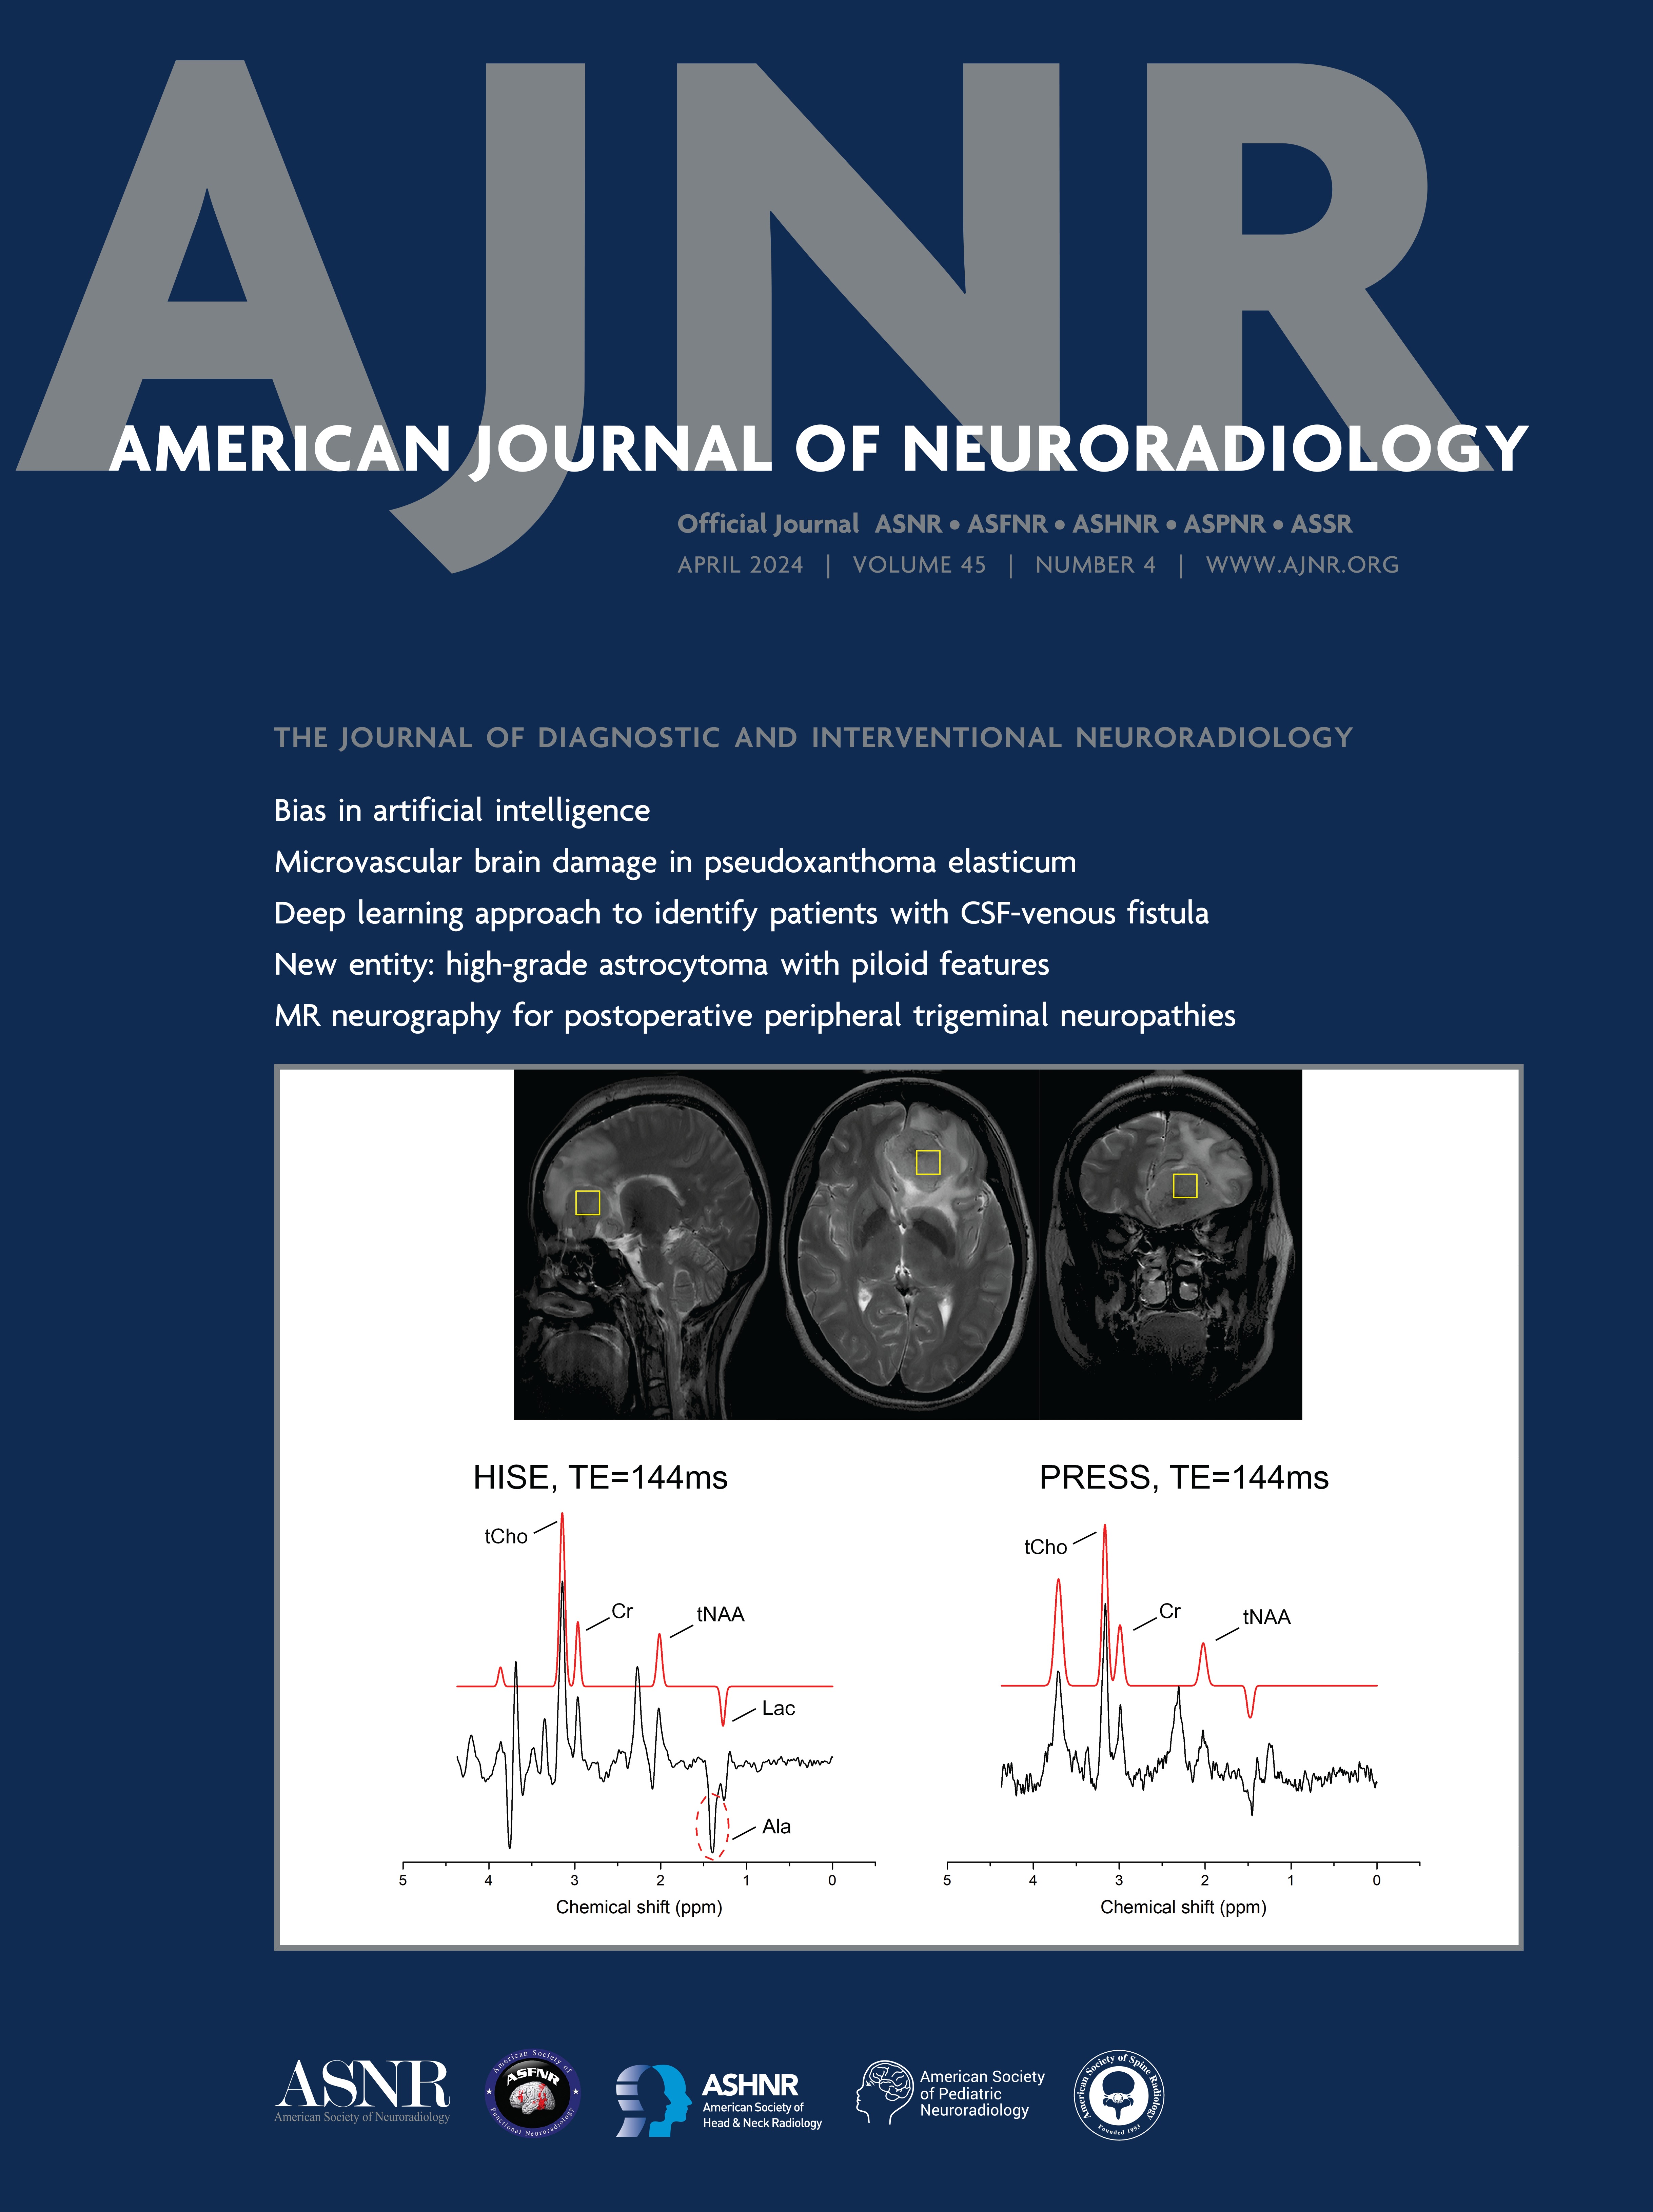 Introducing Our New AJNR Early Career, Women in Neuroradiology, and Global Neuroradiology Awards [EDITORIALS]